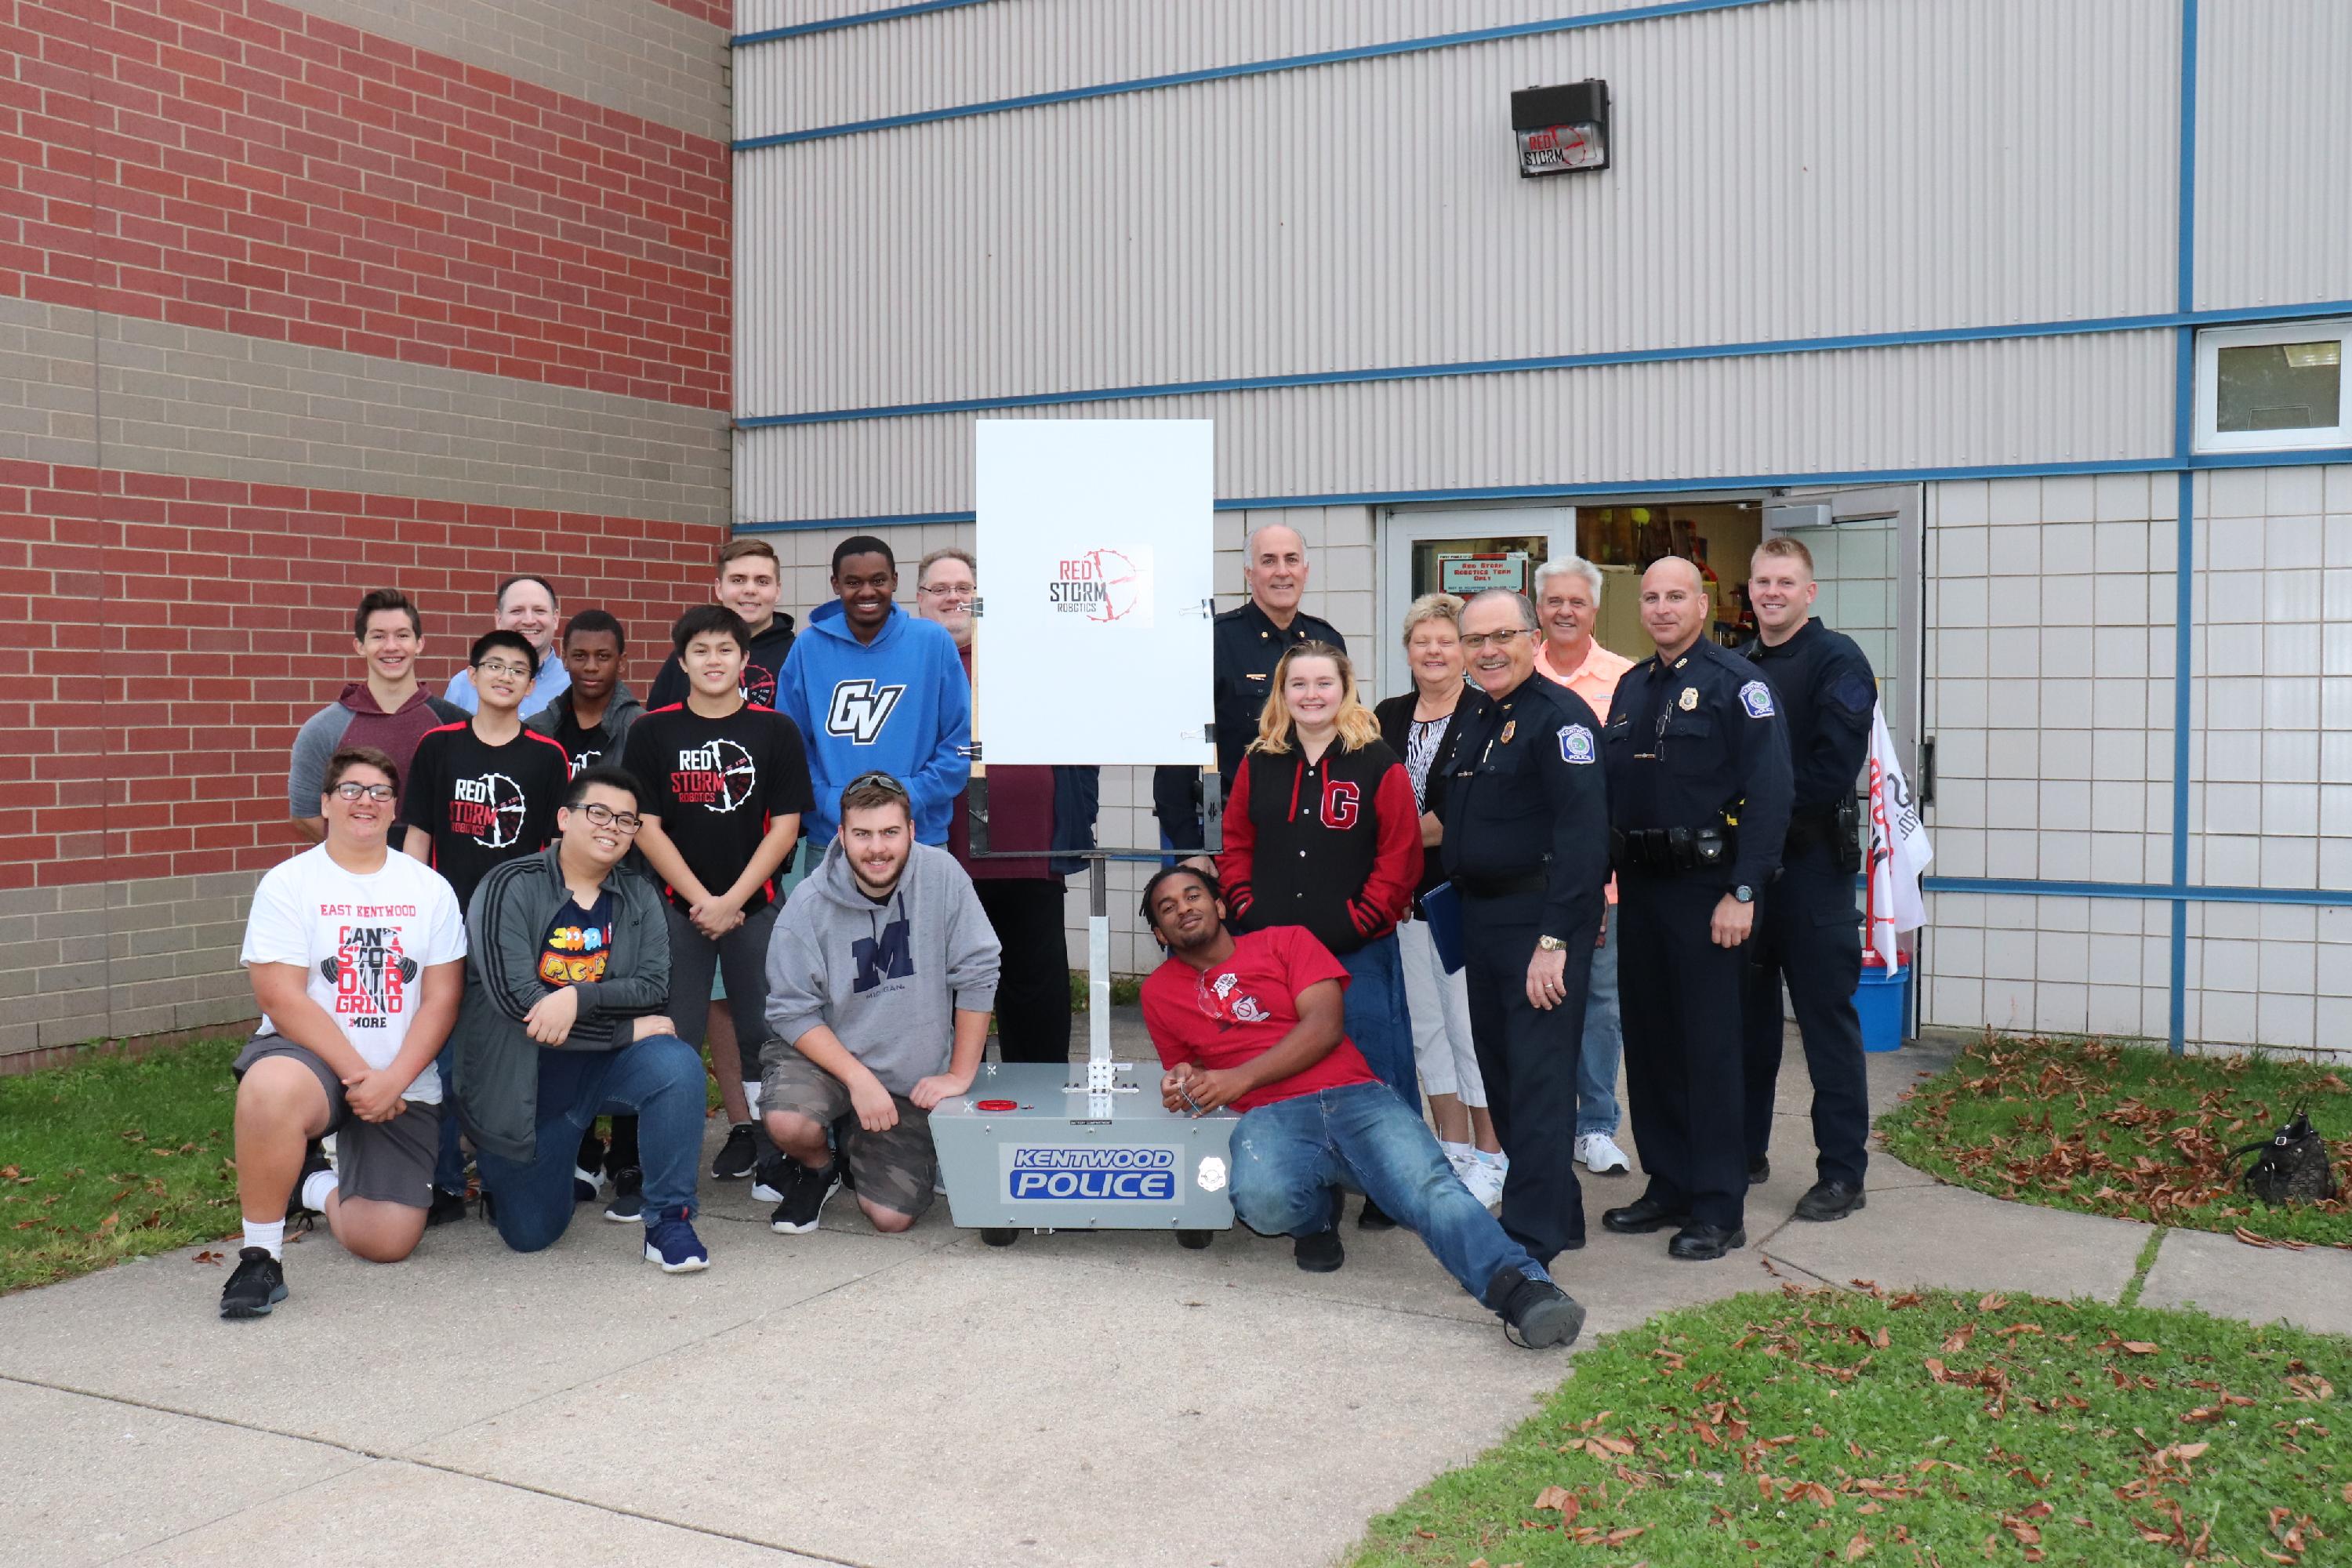 Chief Hillen, Deputy Chief Roberts, Officer Willshire, special response team member Officer Vanderbent, Kentwood Public School students, robotics team mentors and representatives from Target Solutions USA smile for a picture with the Robotic Moving Target System.